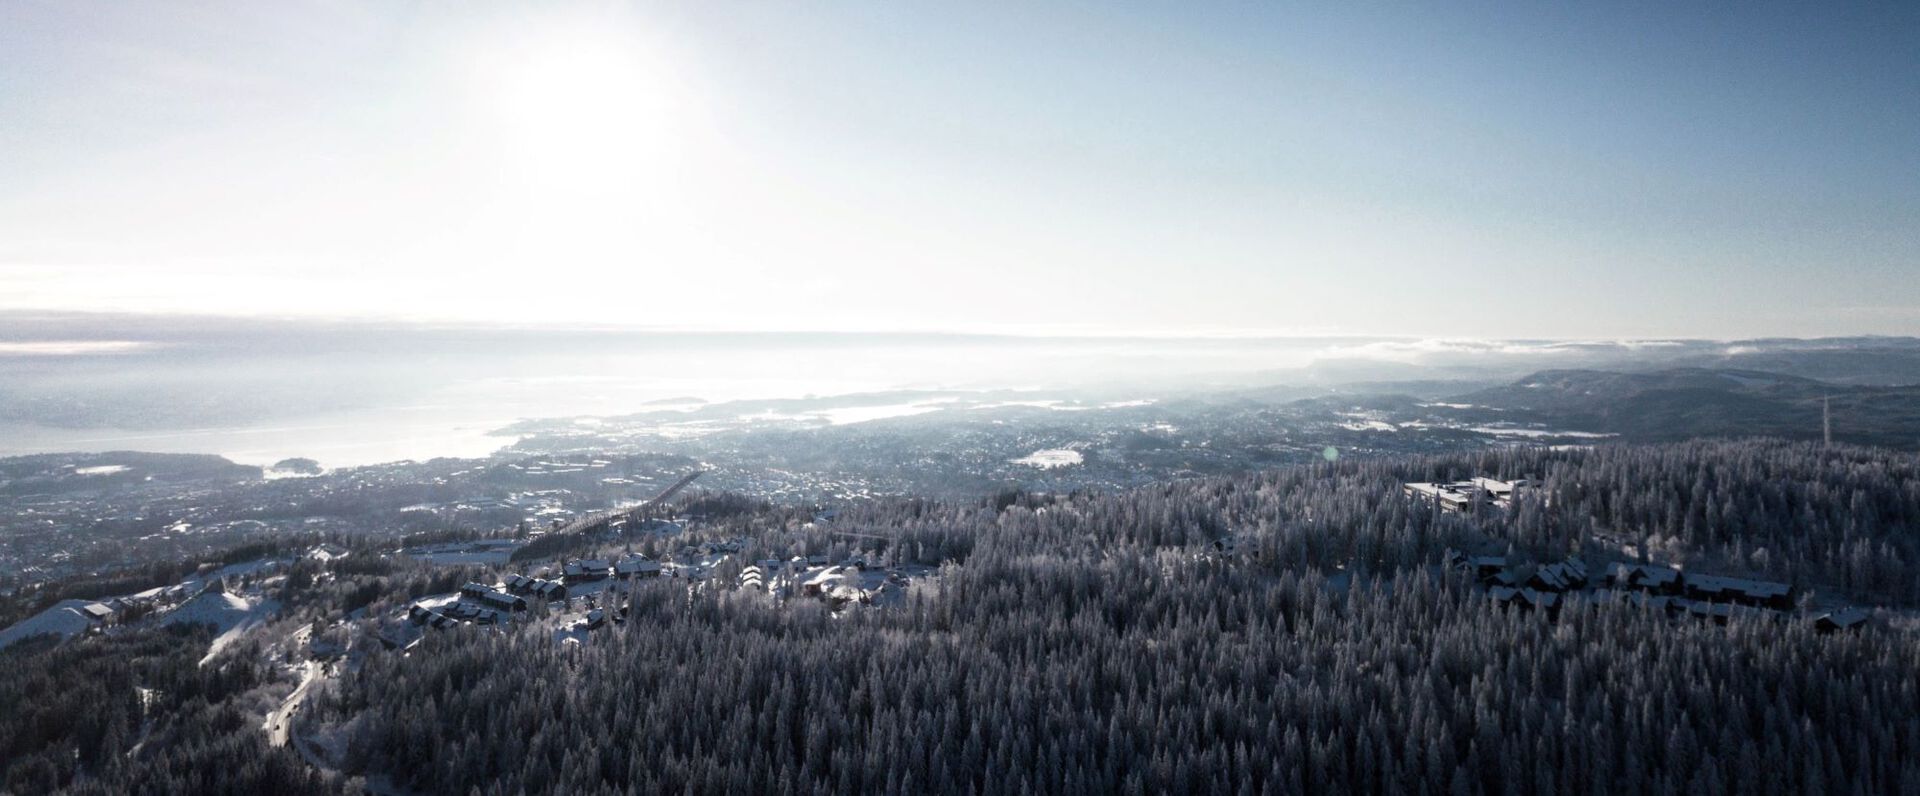 View of Oslo in winter from above.